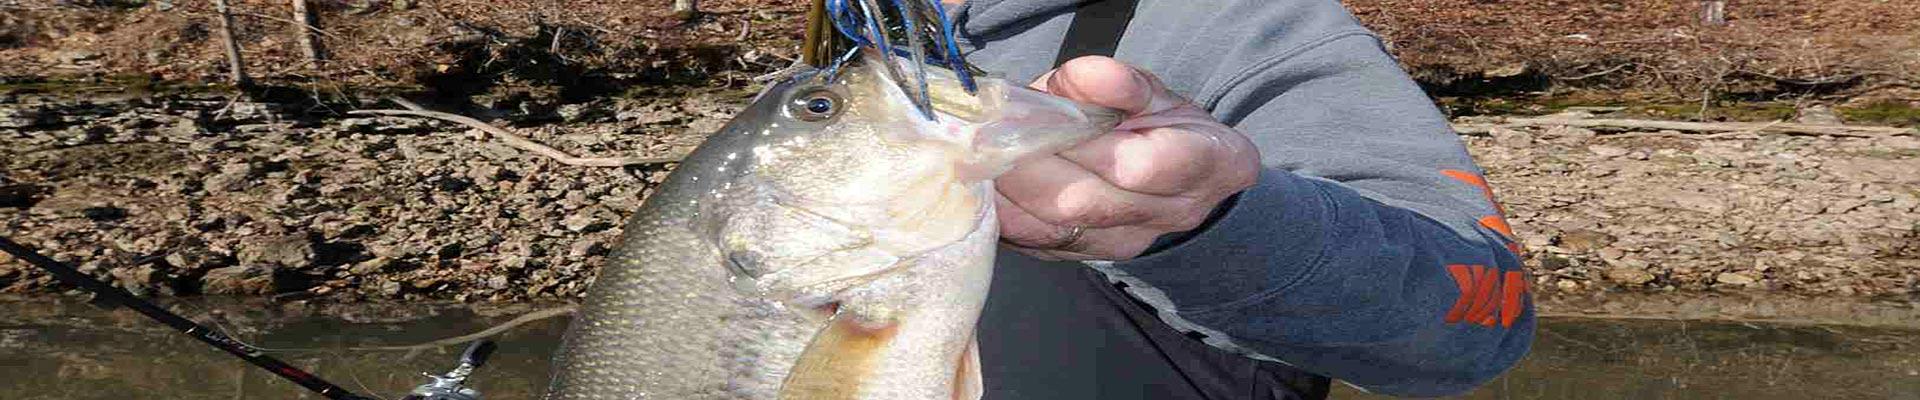 Best Baits for Spring Bass Fishing